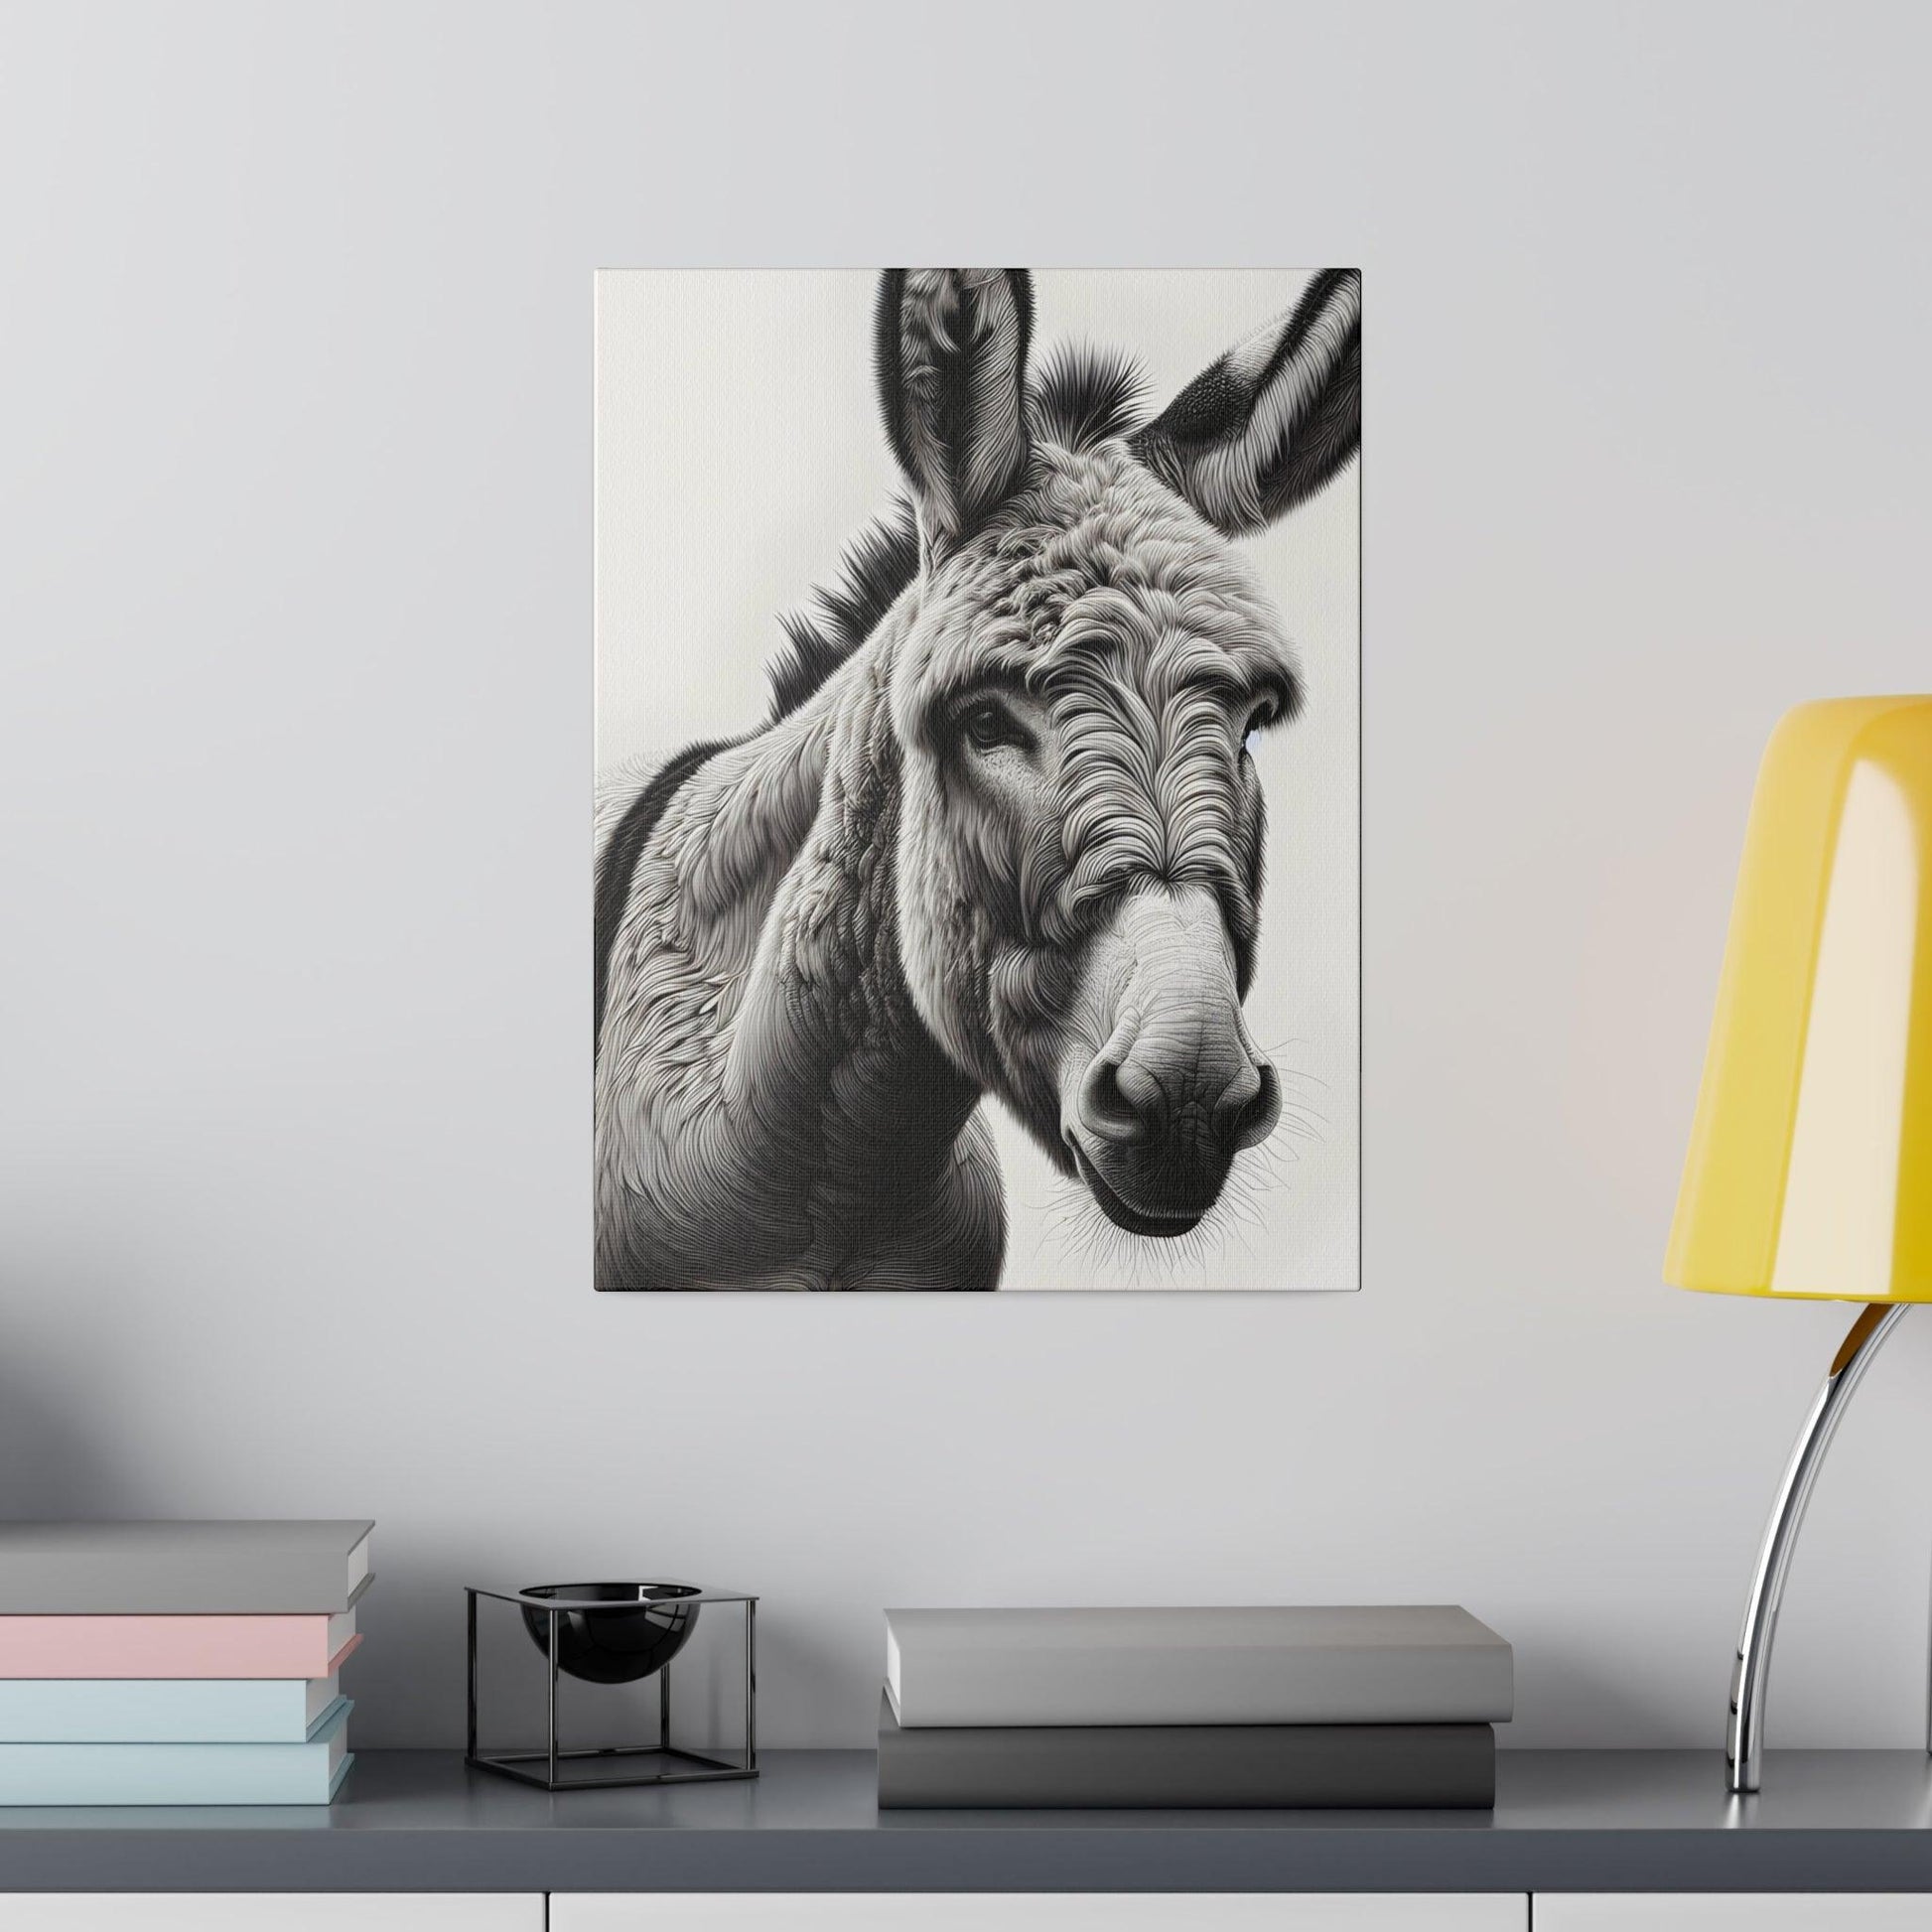 "Whimsical Wonder: The Donkey-inspired Canvas Wall Art Collection" - The Alice Gallery